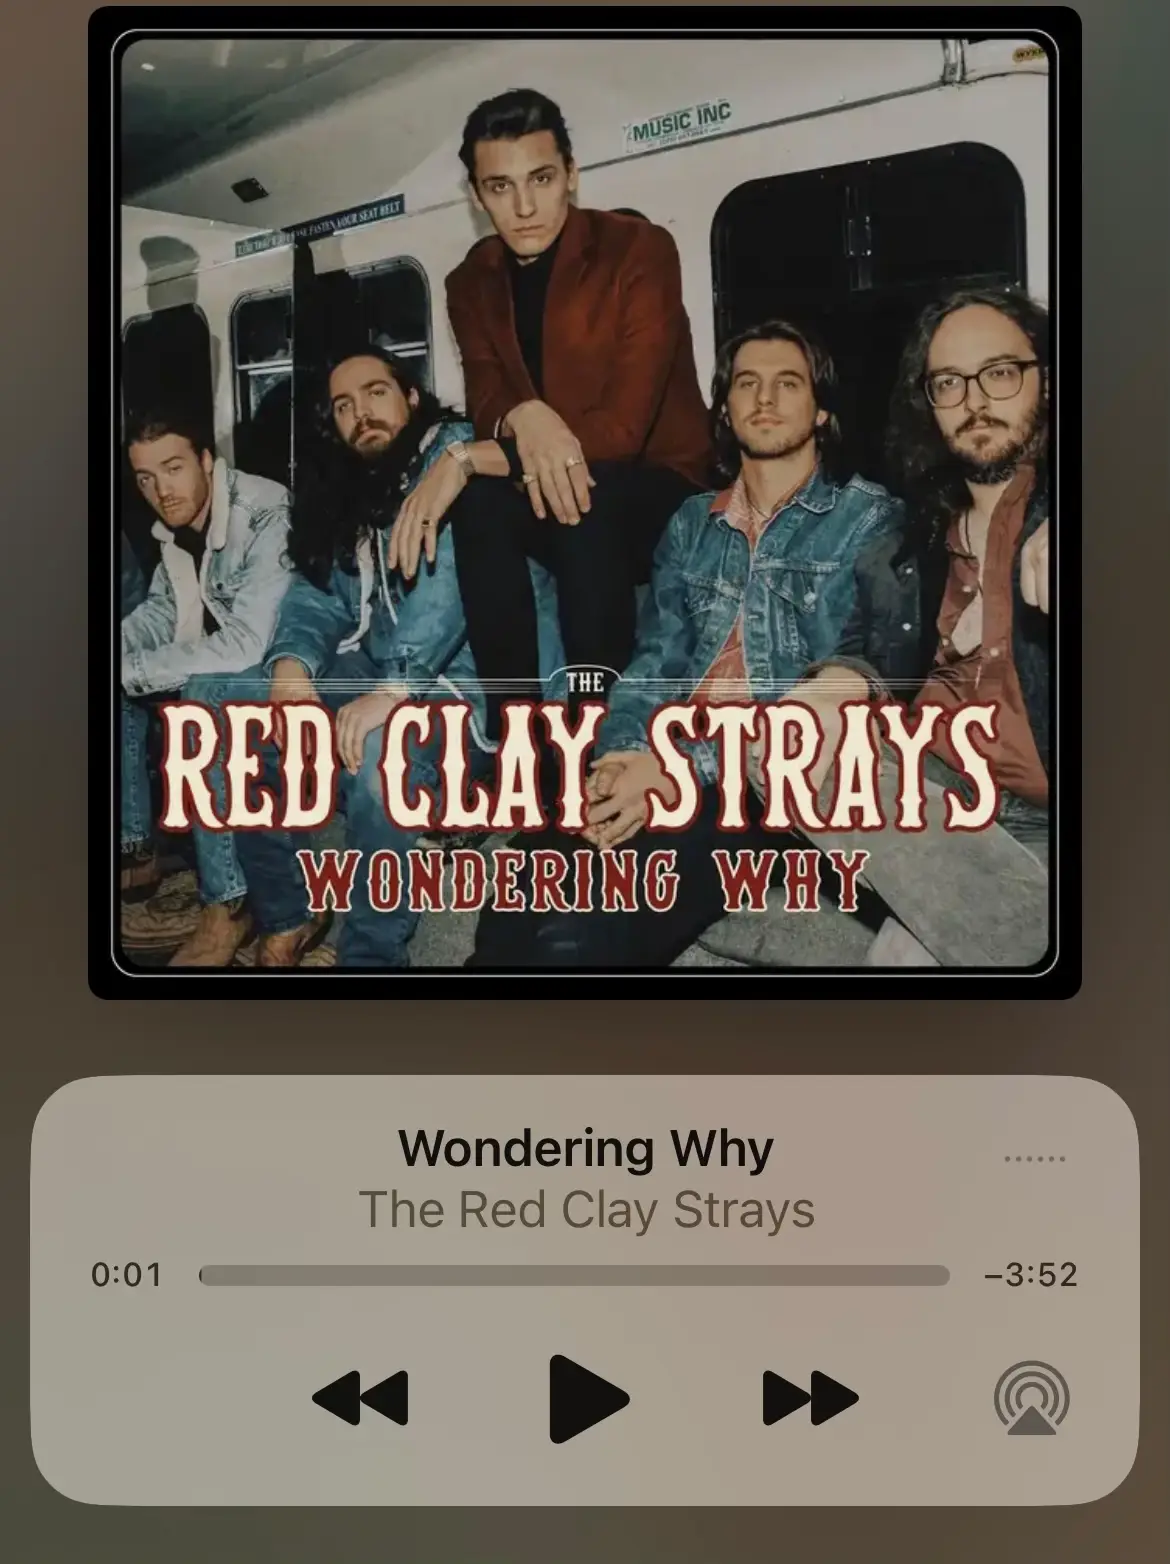 Who Are the Red Clay Strays and 'Wondering Why'?